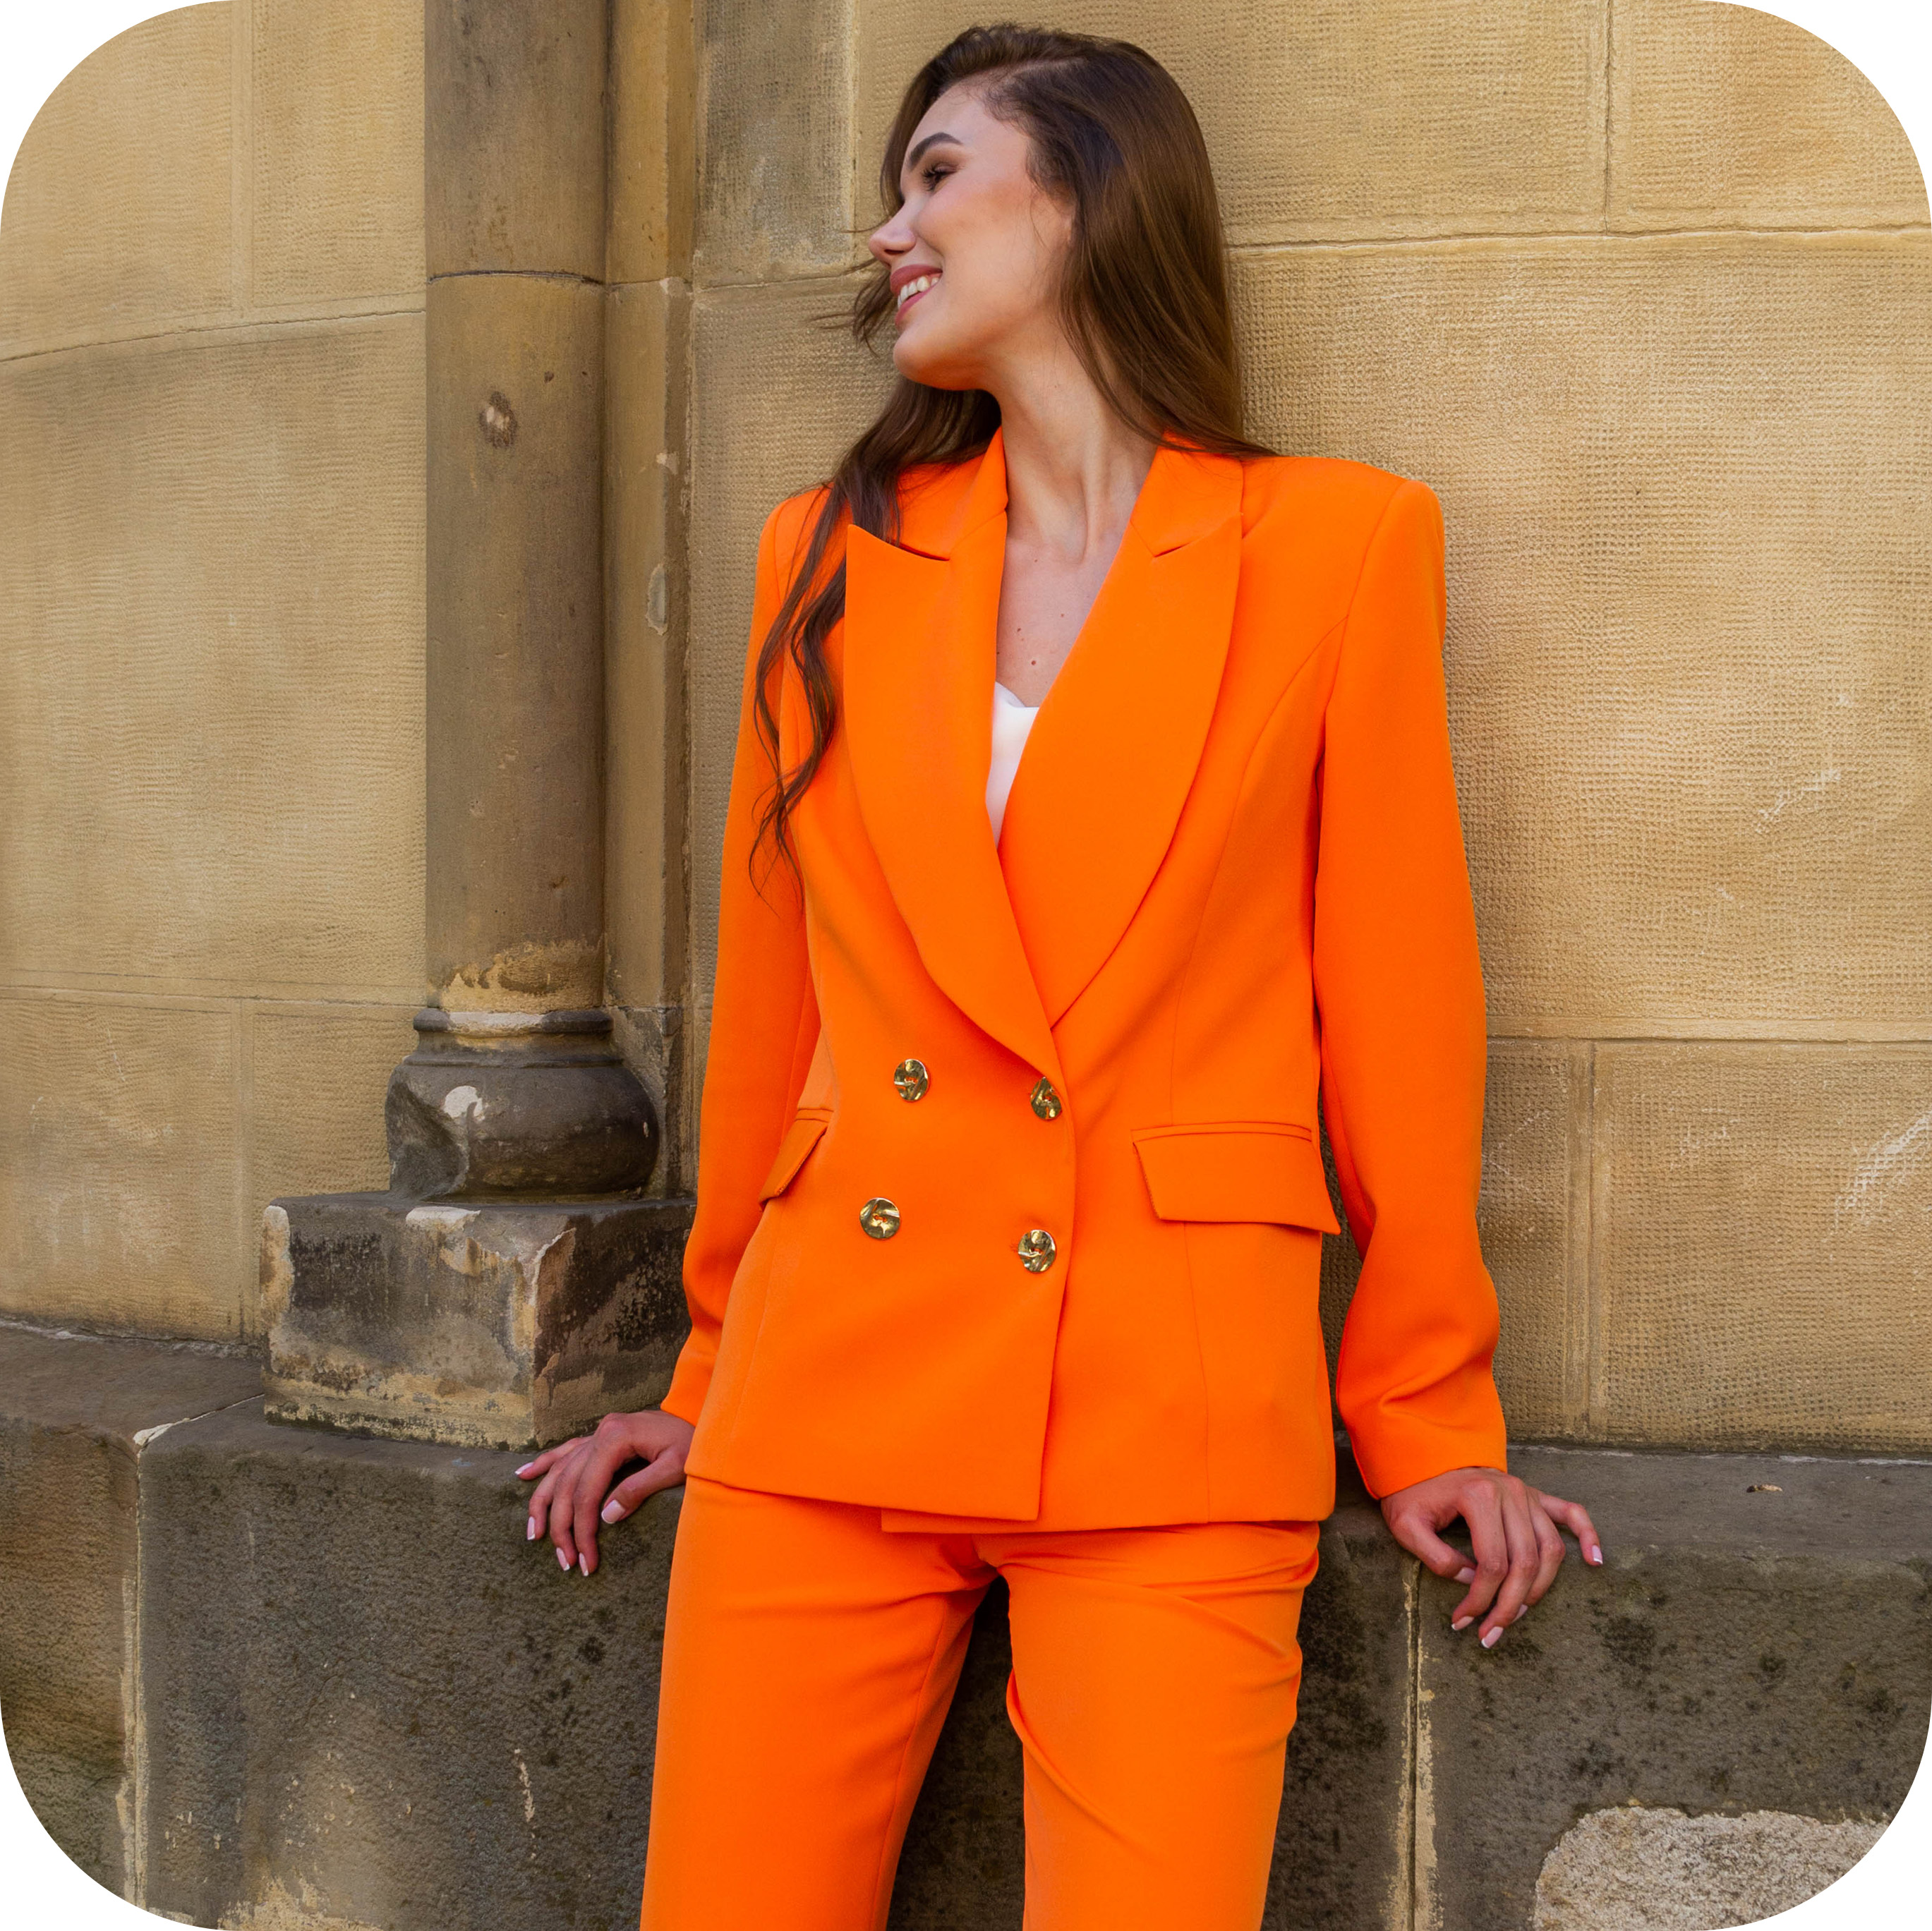 Double-breasted orange suit